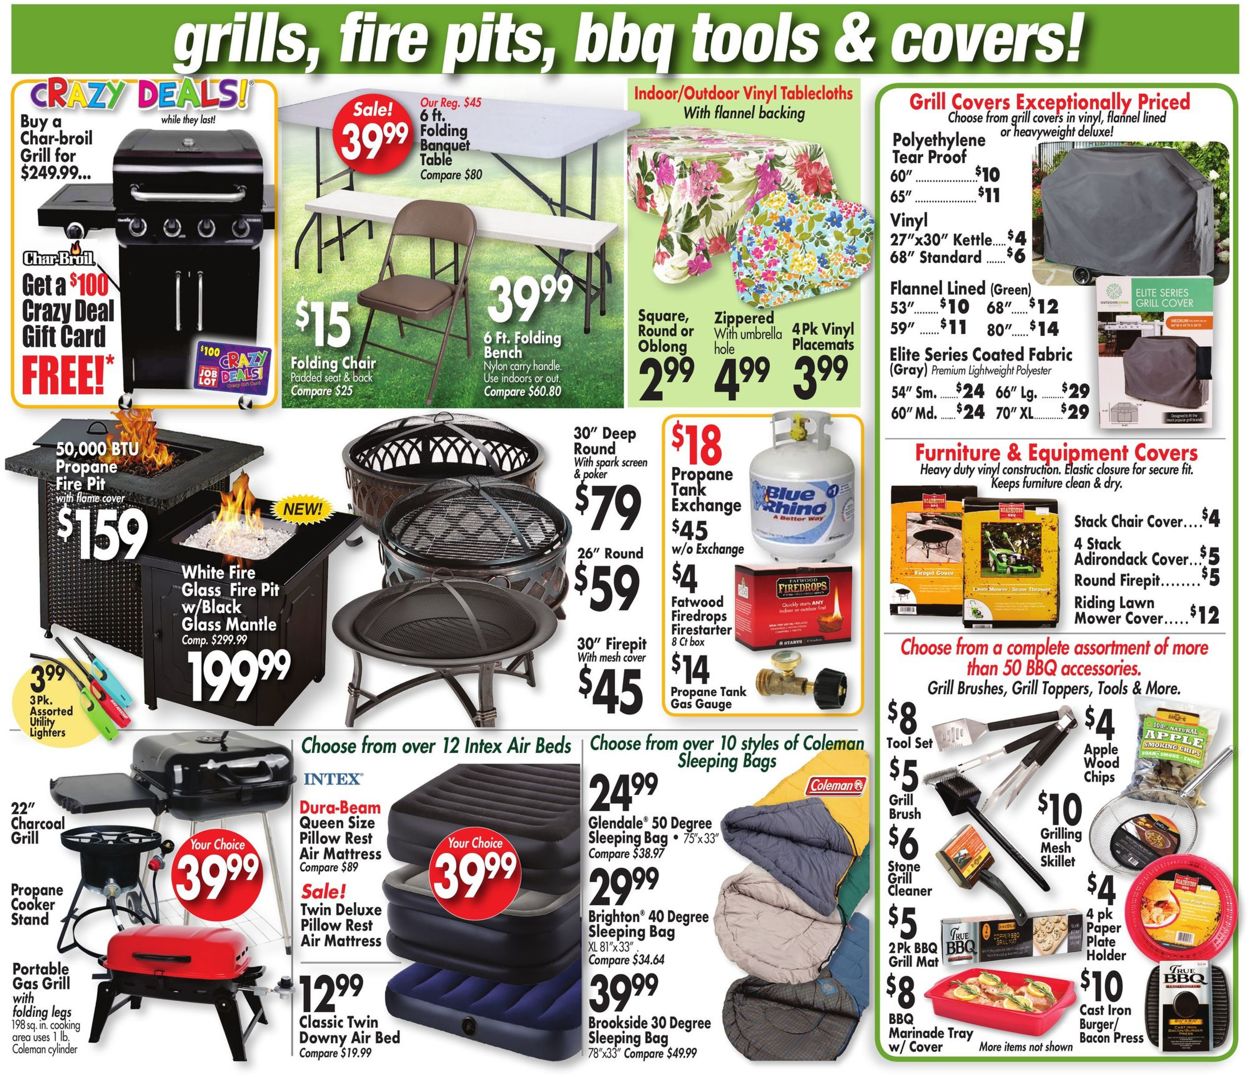 Ocean State Job Lot Current weekly ad 06/06 - 06/12/2019 [4] - frequent Ocean State Job Lot Grill Covers